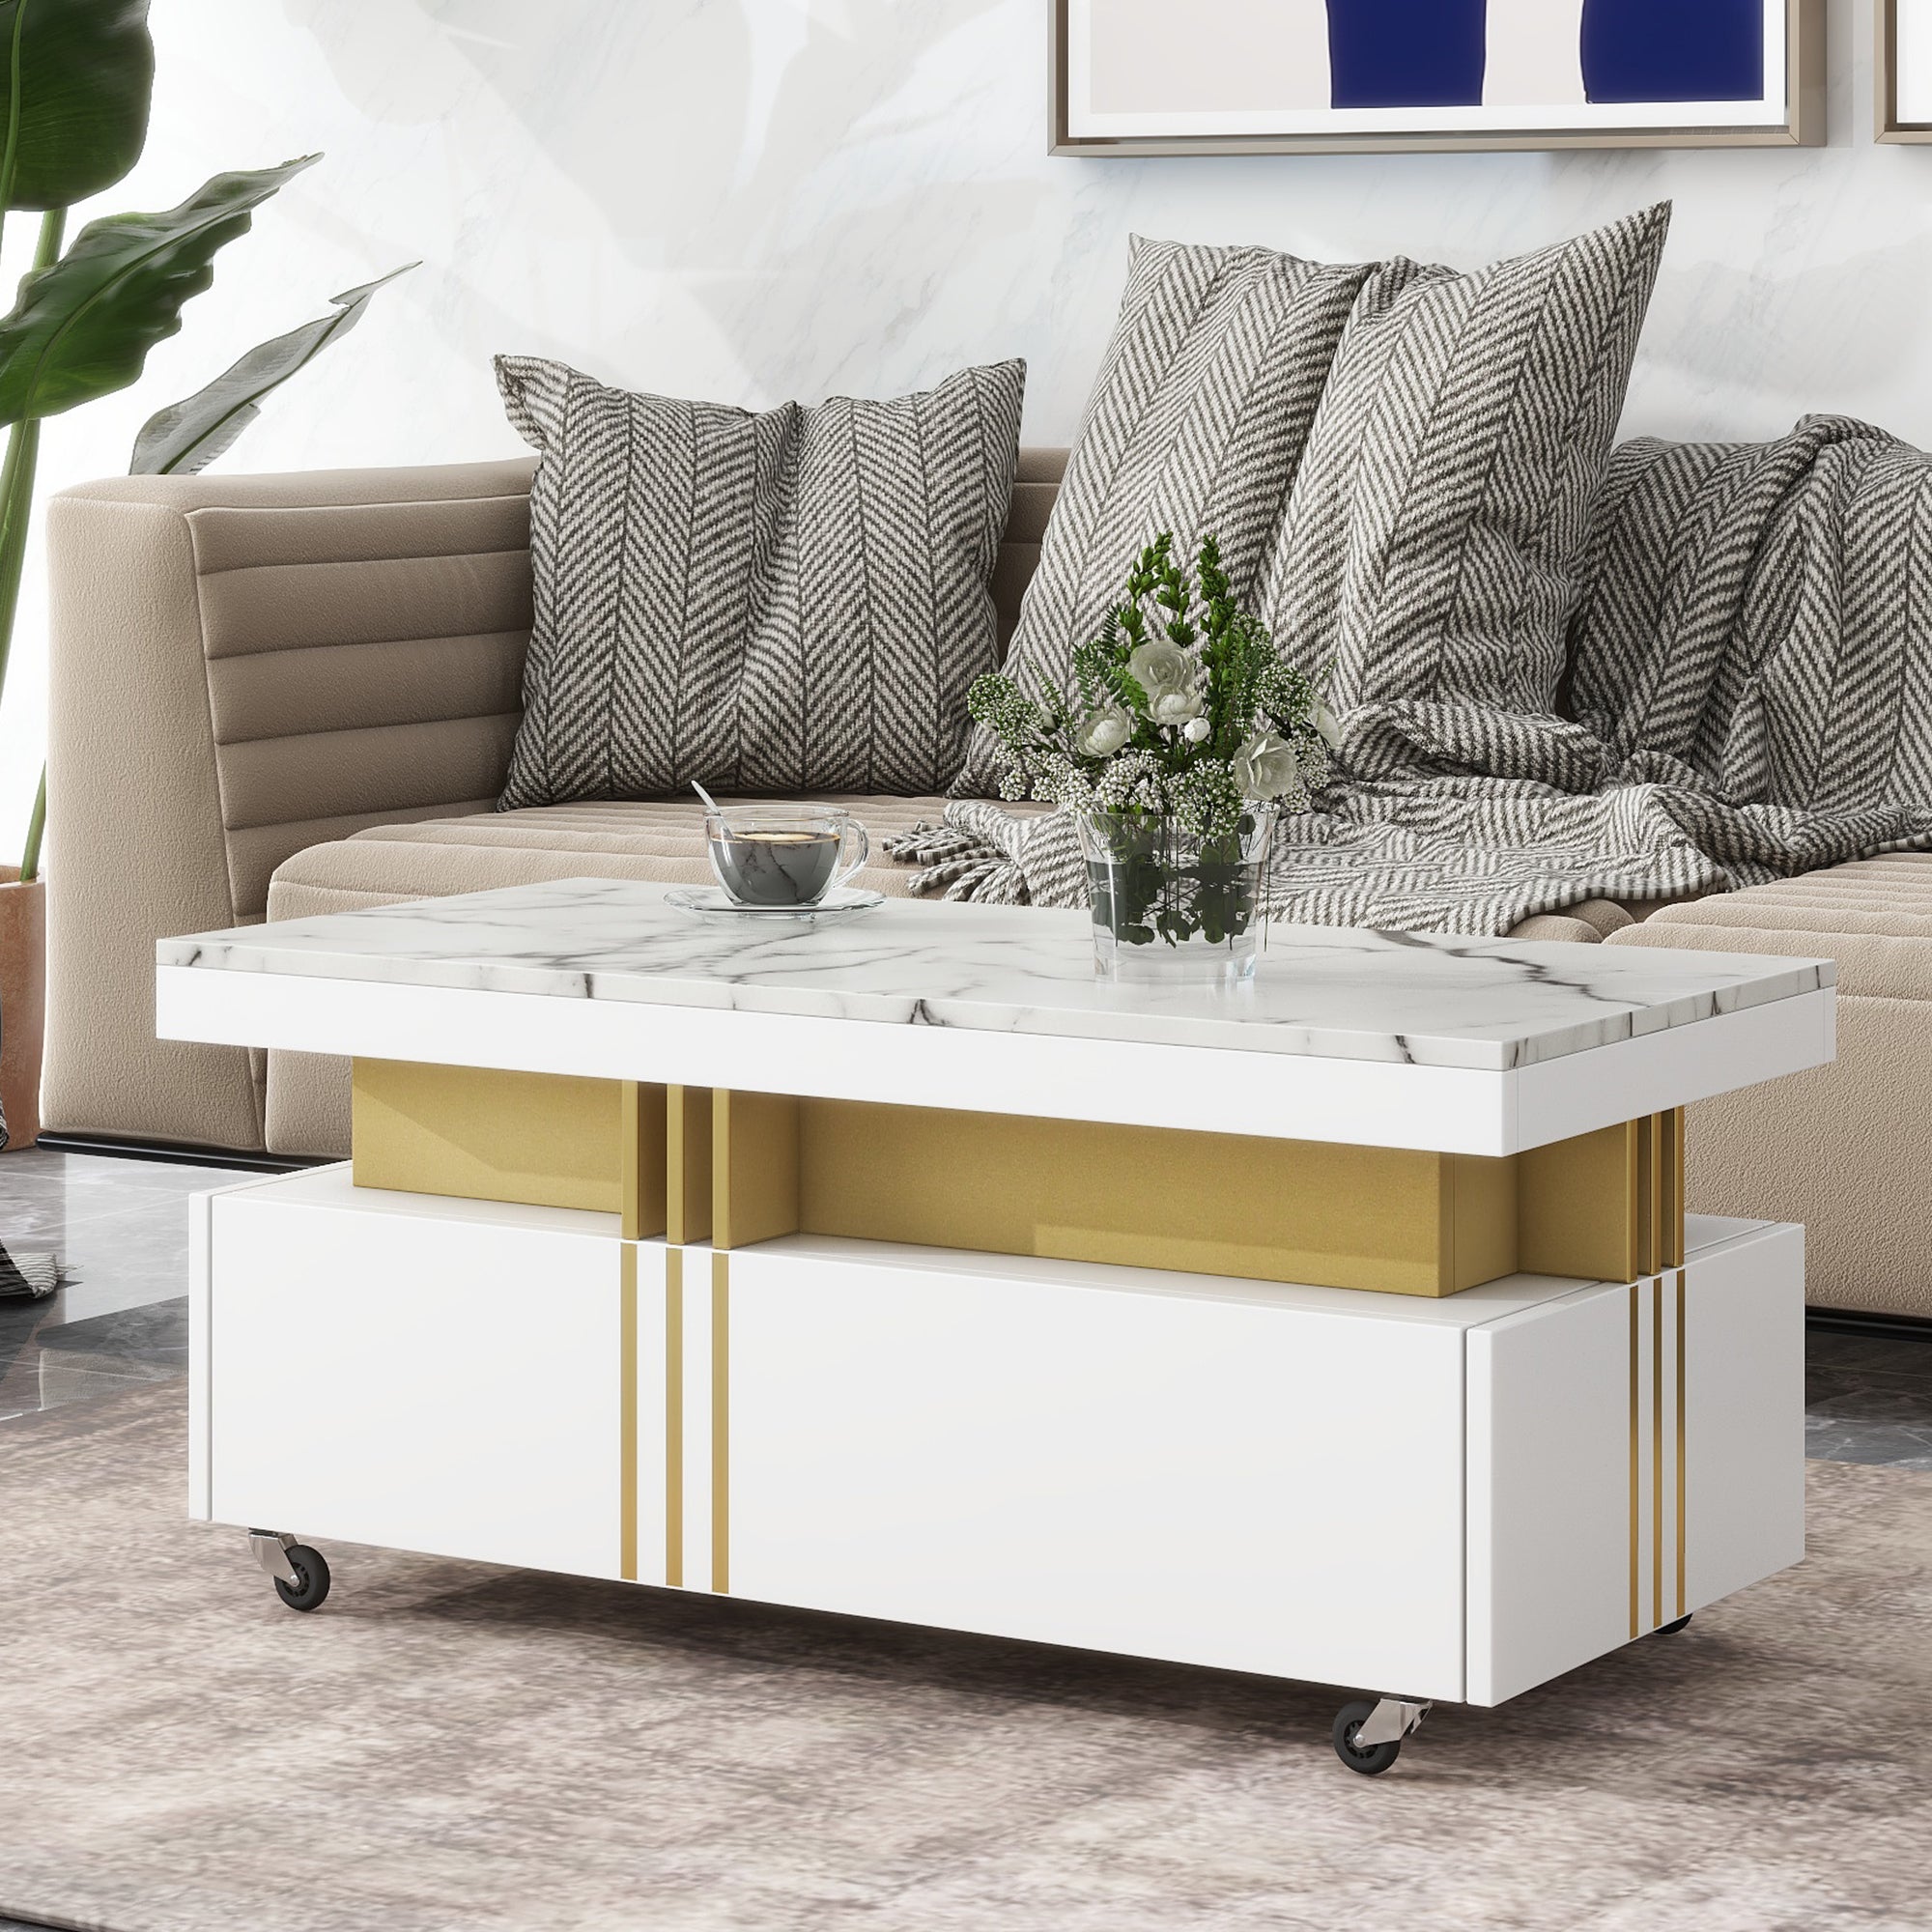 ON-TREND Contemporary Coffee Table with Faux Marble Top, Rectangle Cocktail Table with Caster Wheels, Moderate Luxury Center Table with Gold Metal Bars for Living Room, White